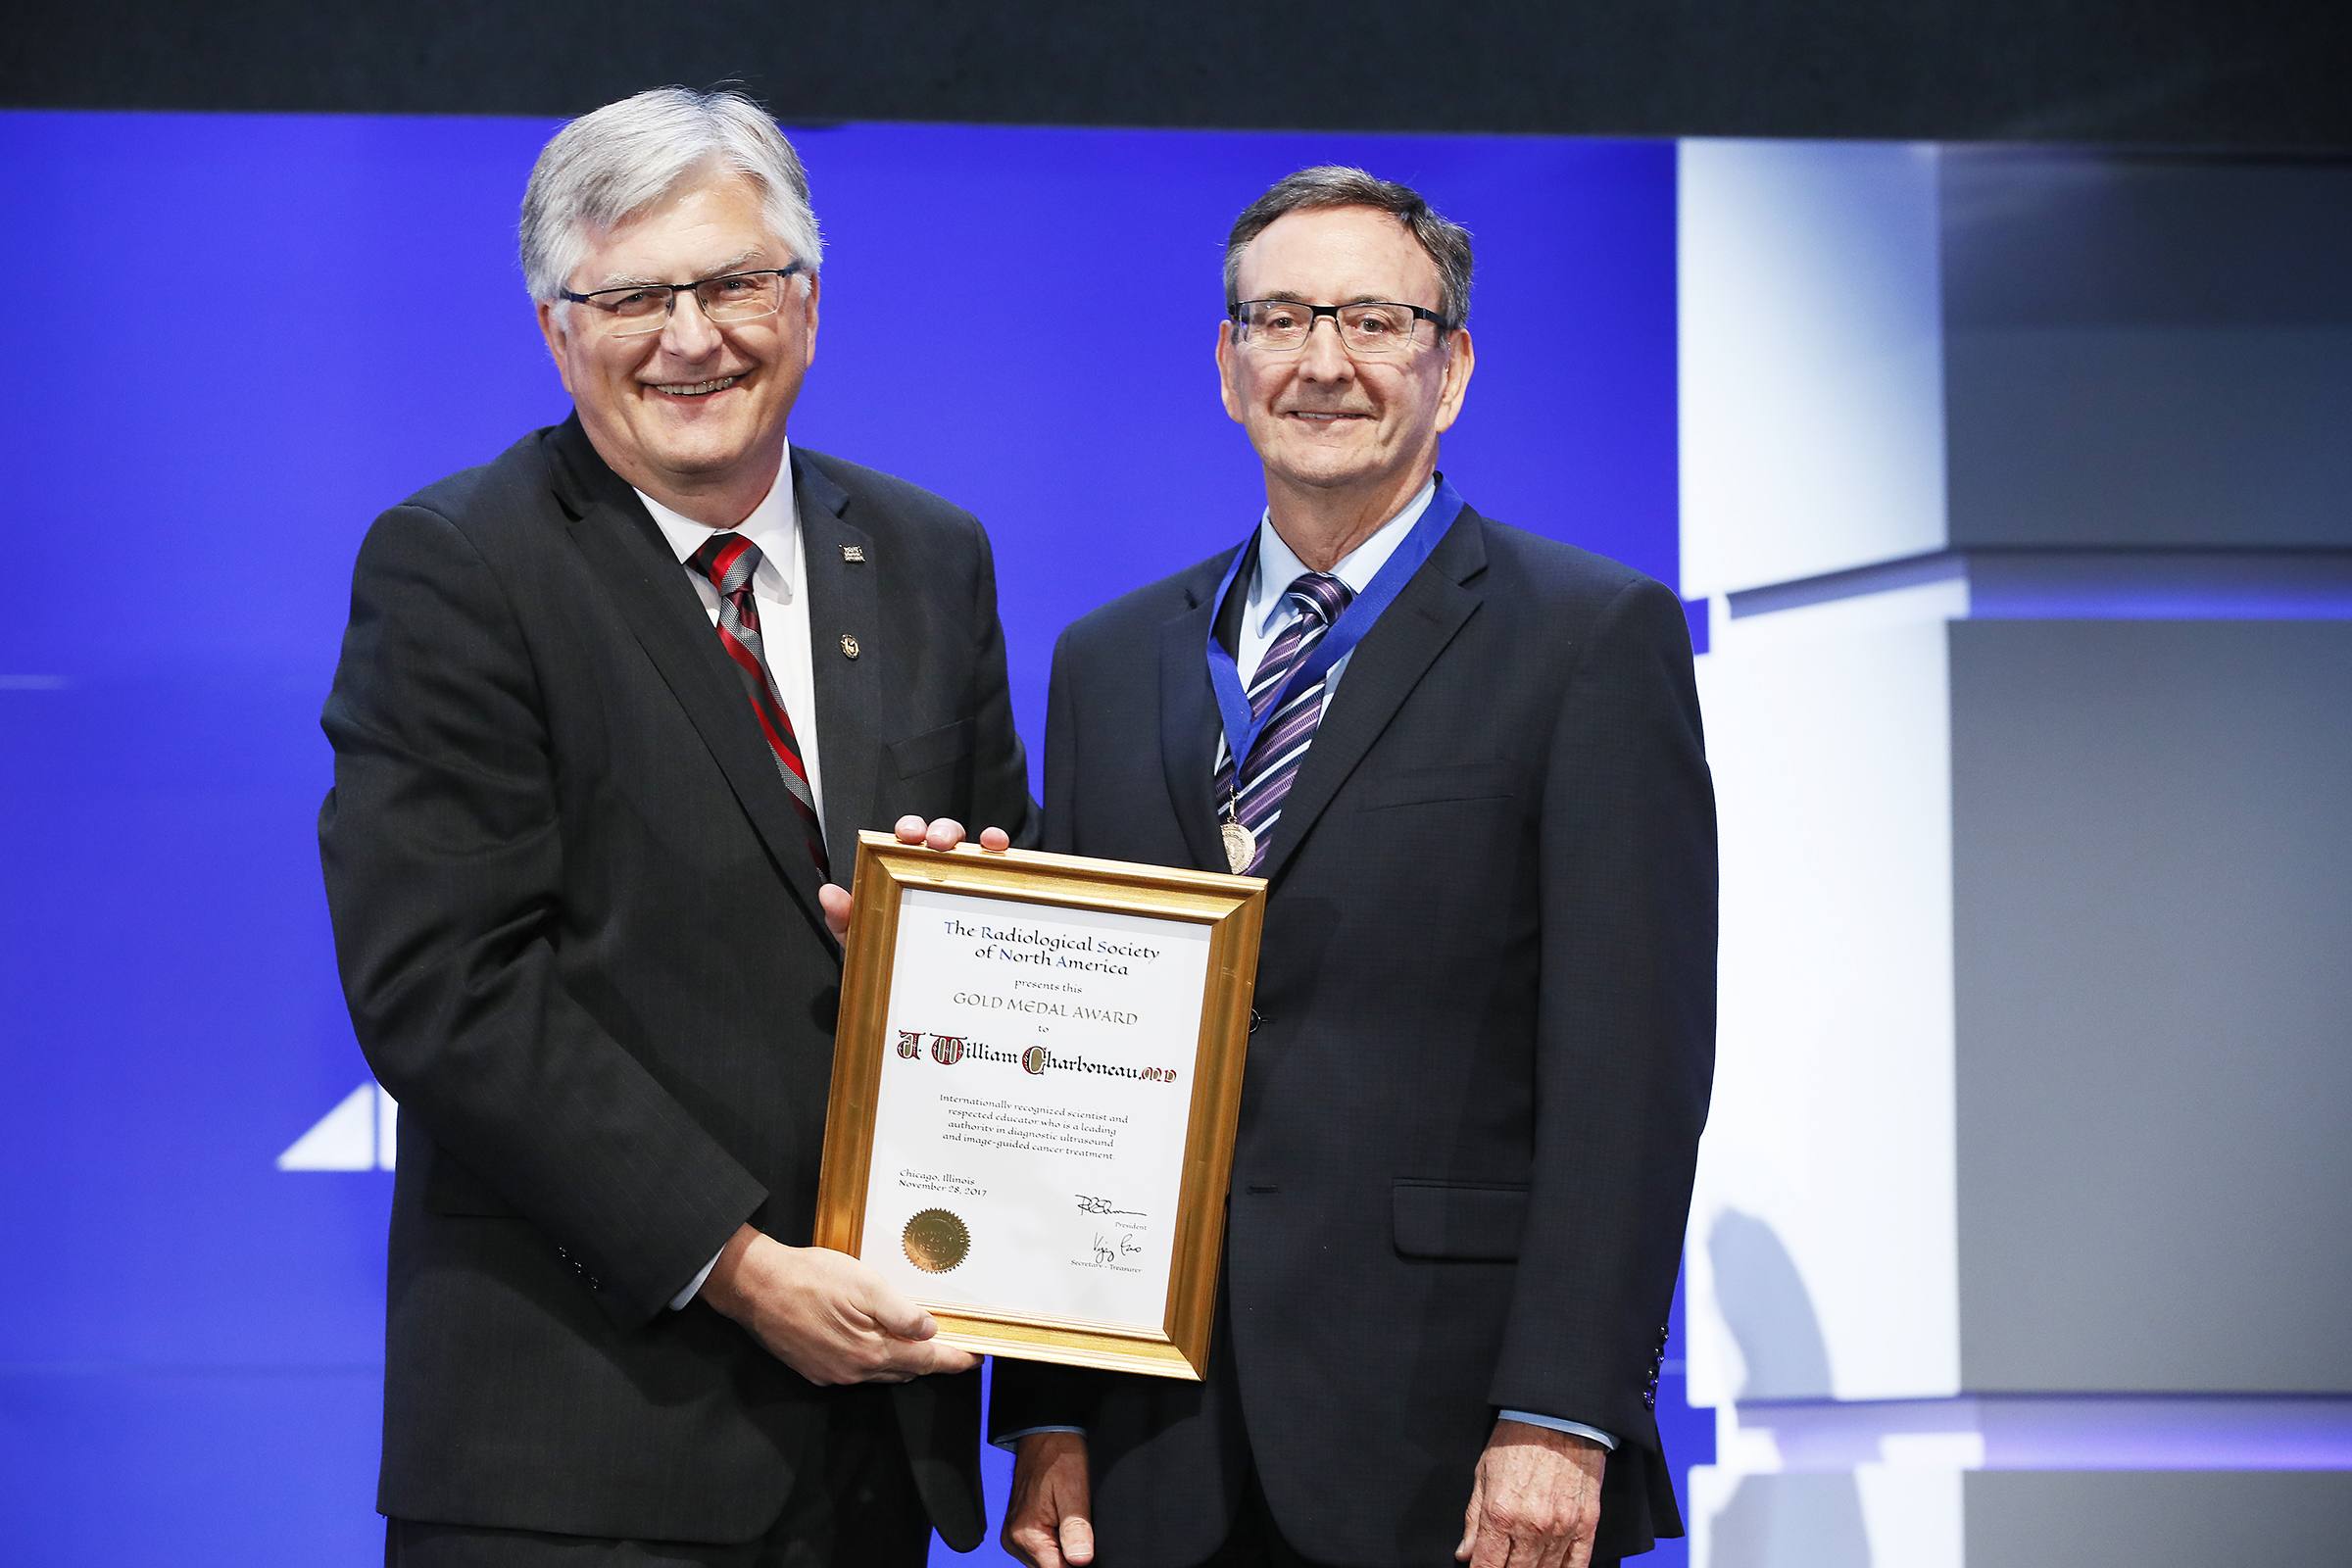 Photo of Dr. J. William Charboneau and award